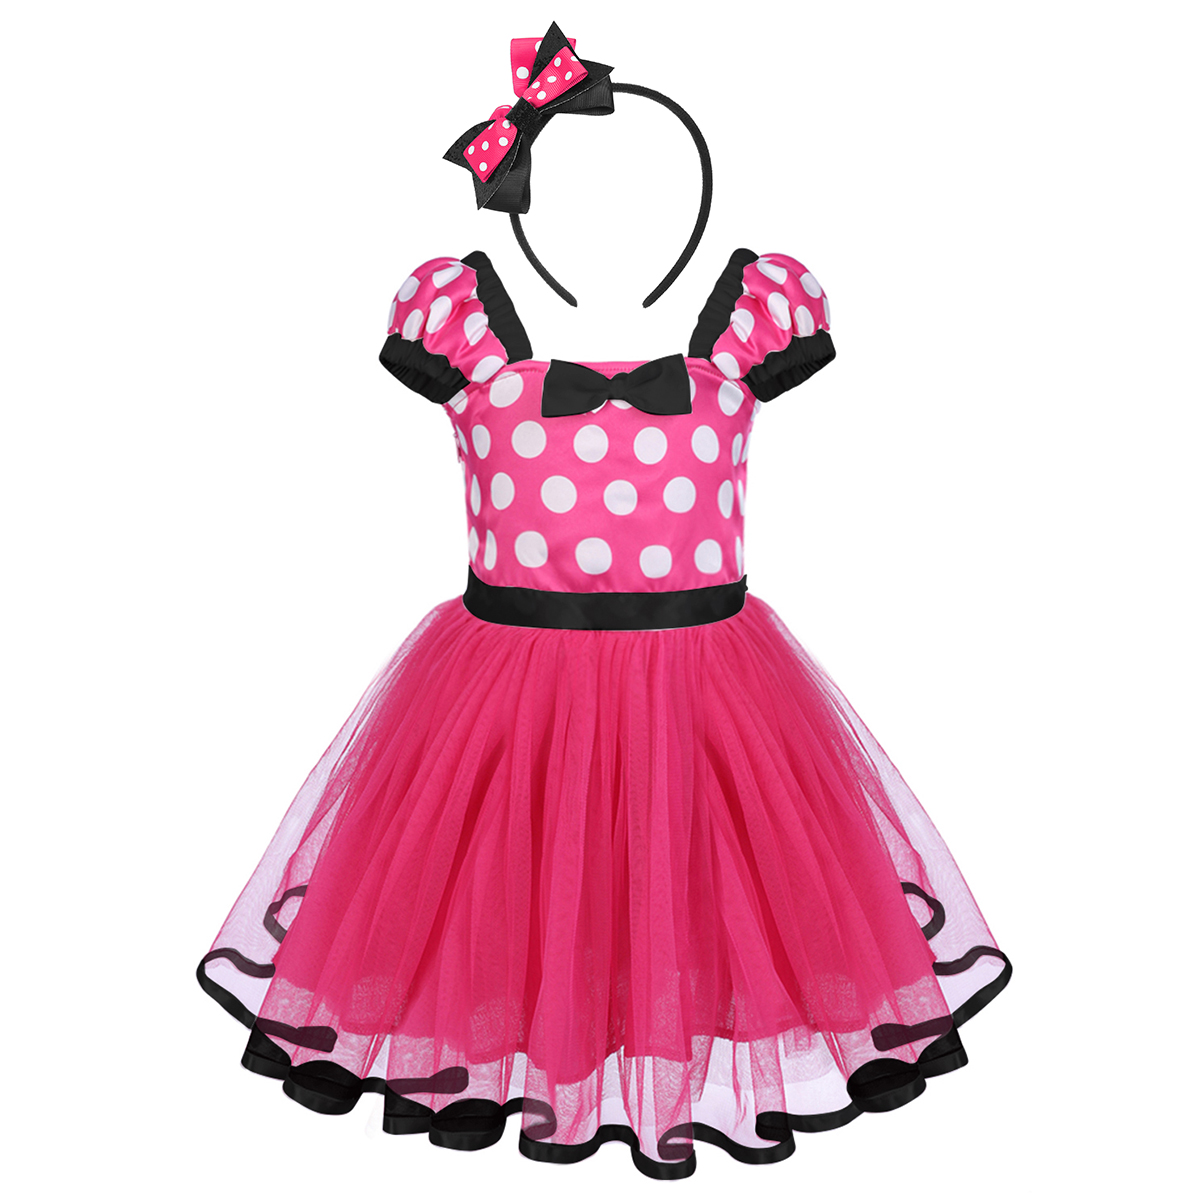 IBTOM CASTLE Toddler Girls Polka Dots Princess Party Cosplay Pageant Fancy Dress up Birthday Tutu Dress + Ears Headband Outfit Set 18-24 Months Hot Pink + Black - image 1 of 6